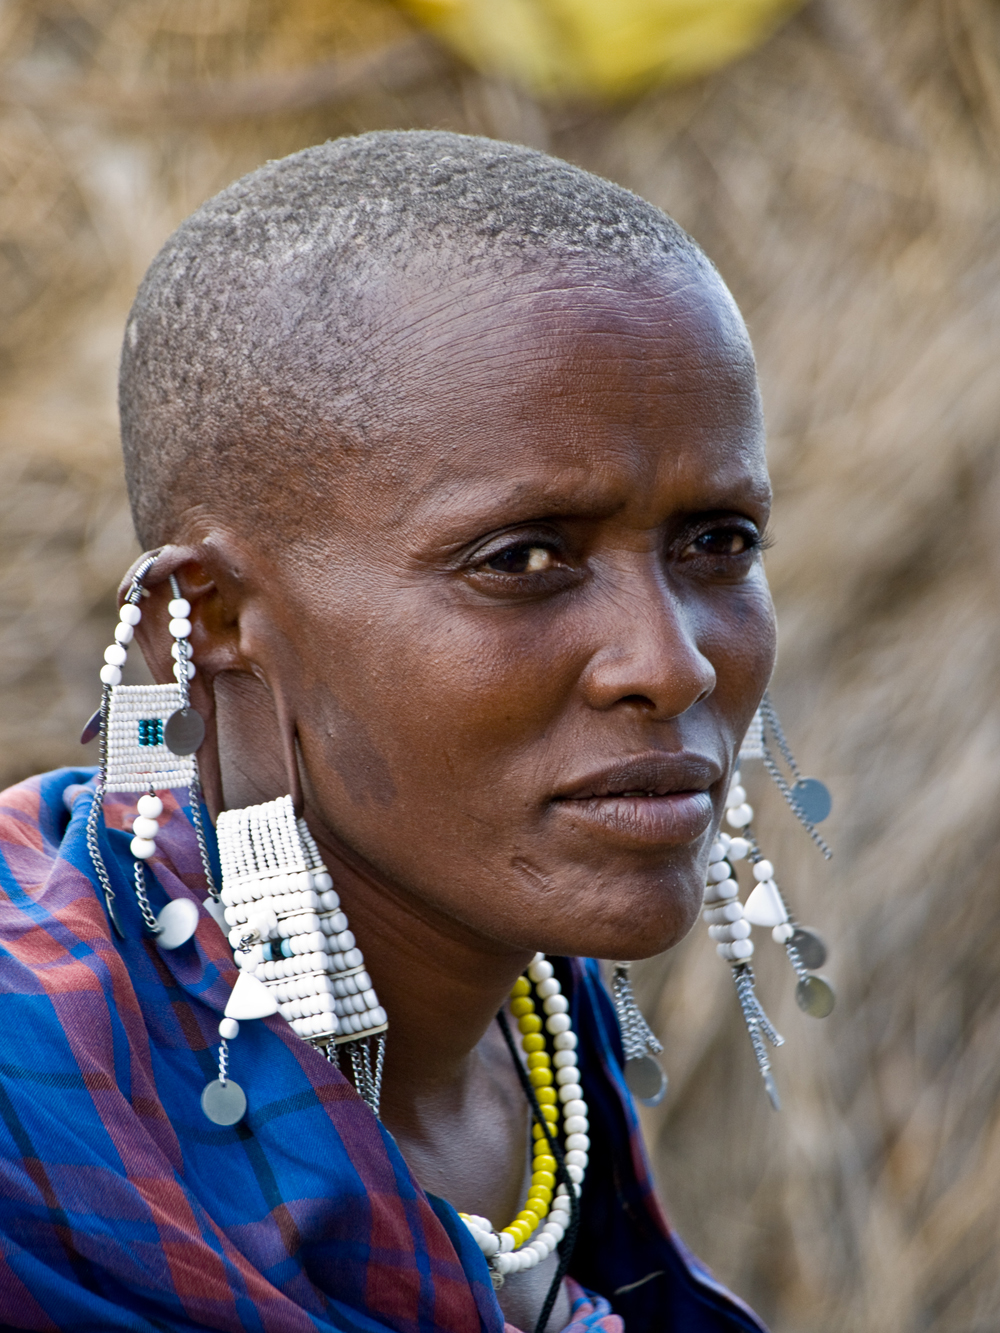 Maasai woman in traditional clothing and jewellery in the Serengeti National Park, Tanzania